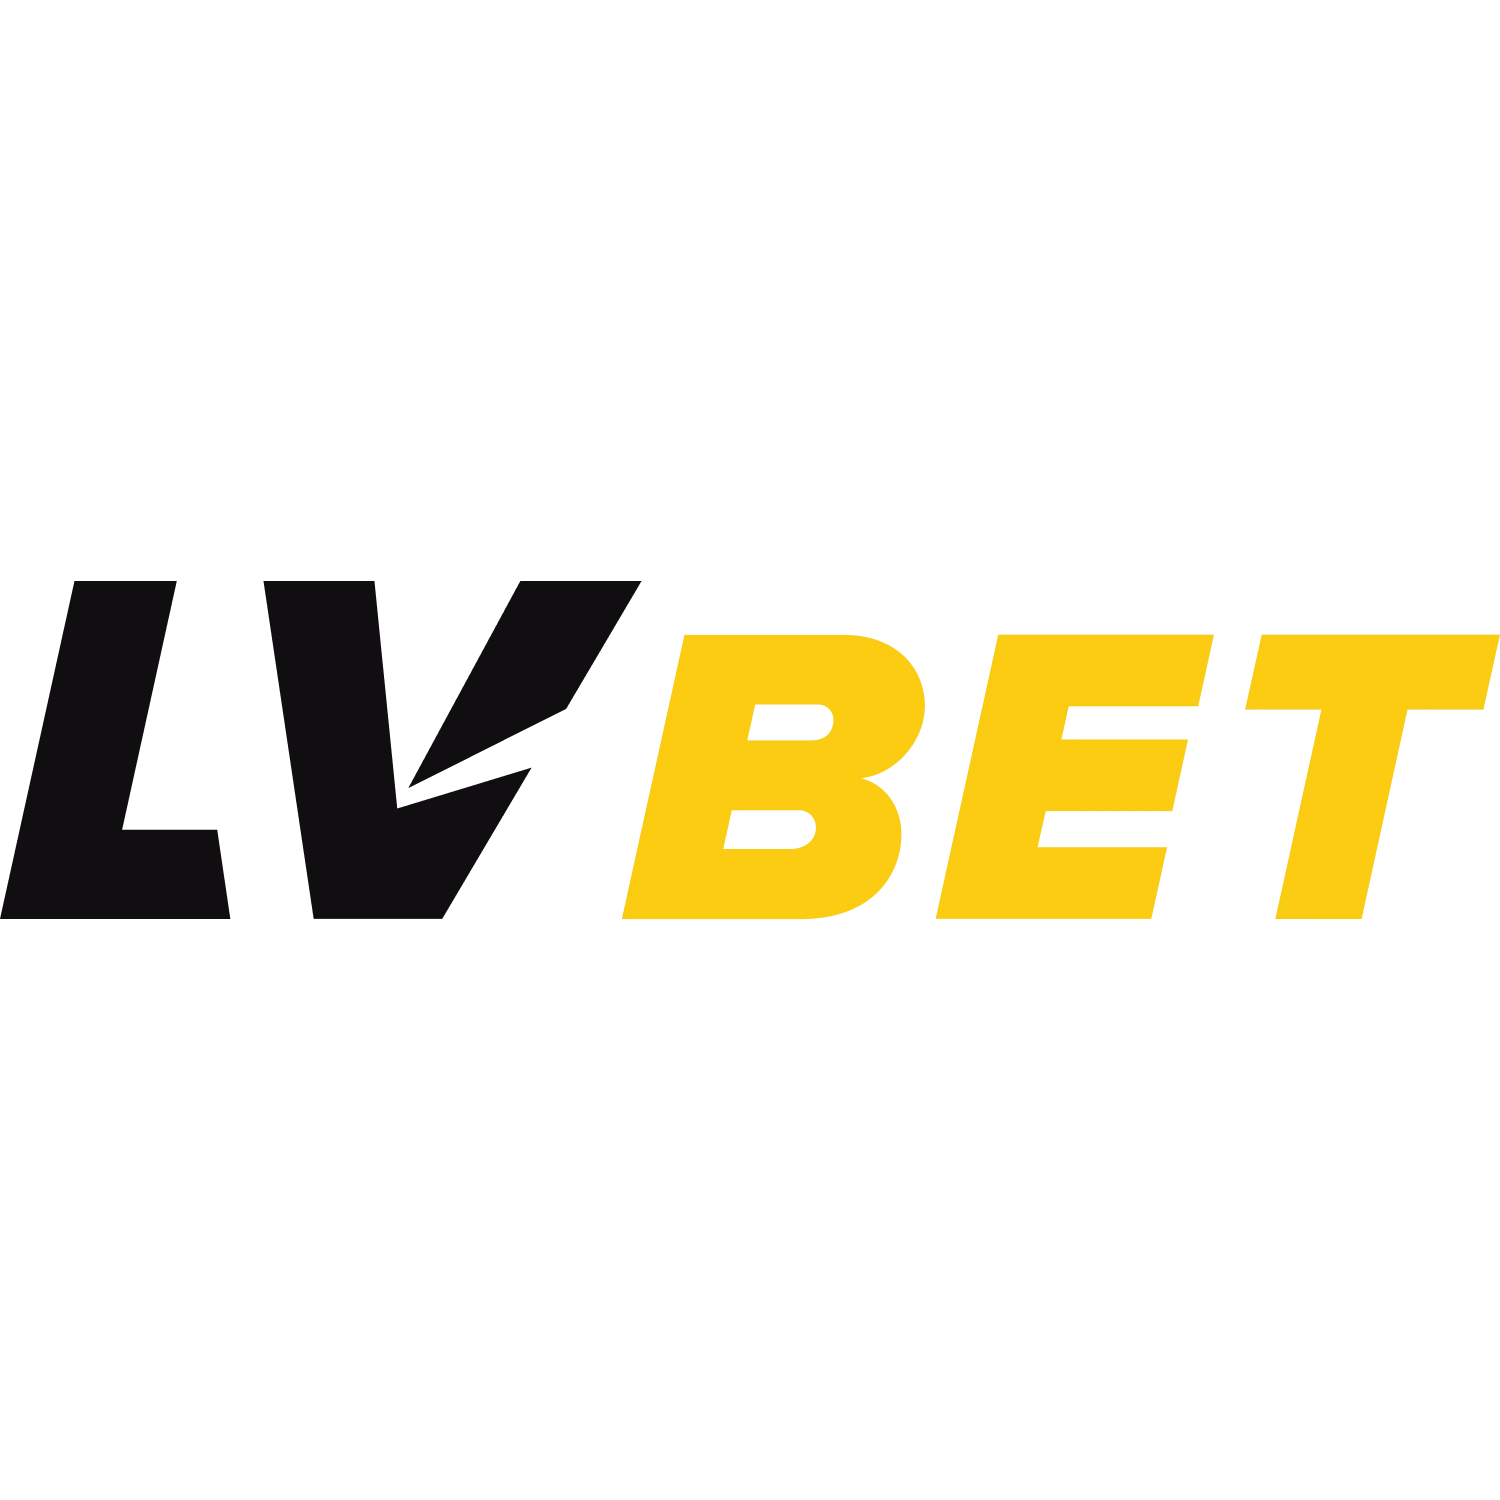 Place your bets and play at casinos with LV Bet.